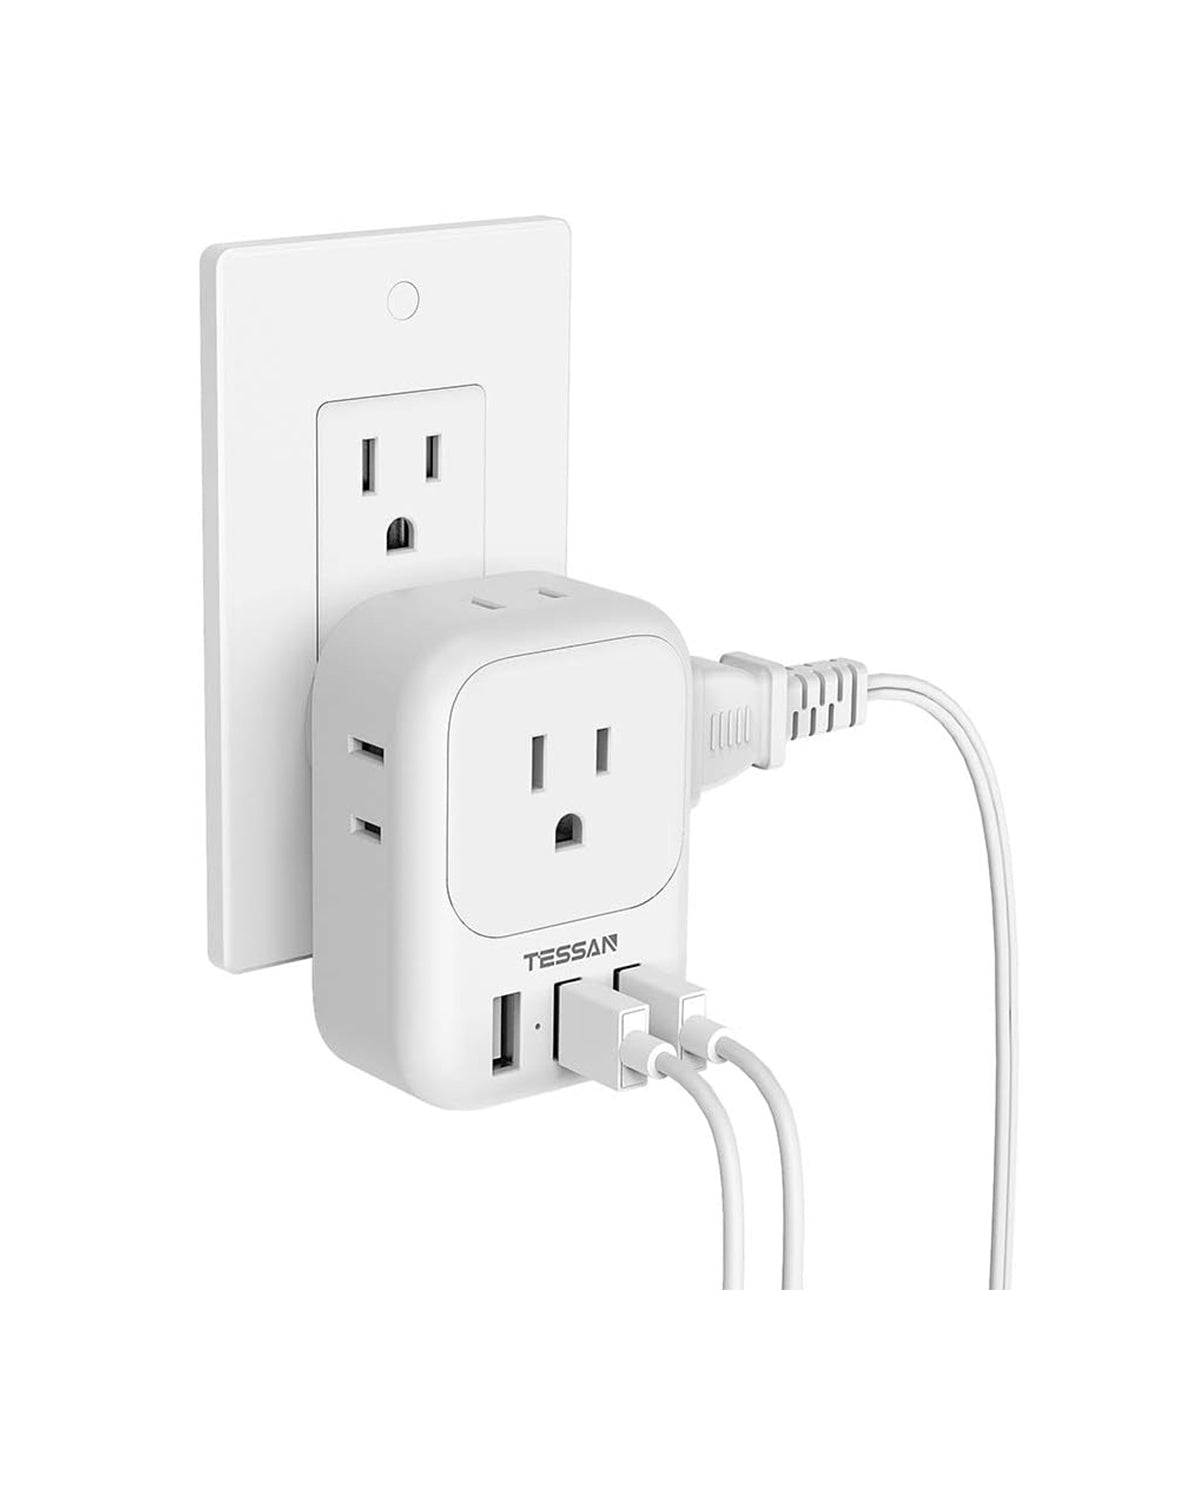 TESSAN Electrical 4 Box Splitter 3 USB Wall Charger, Multi Plug Outlet Extender with USB